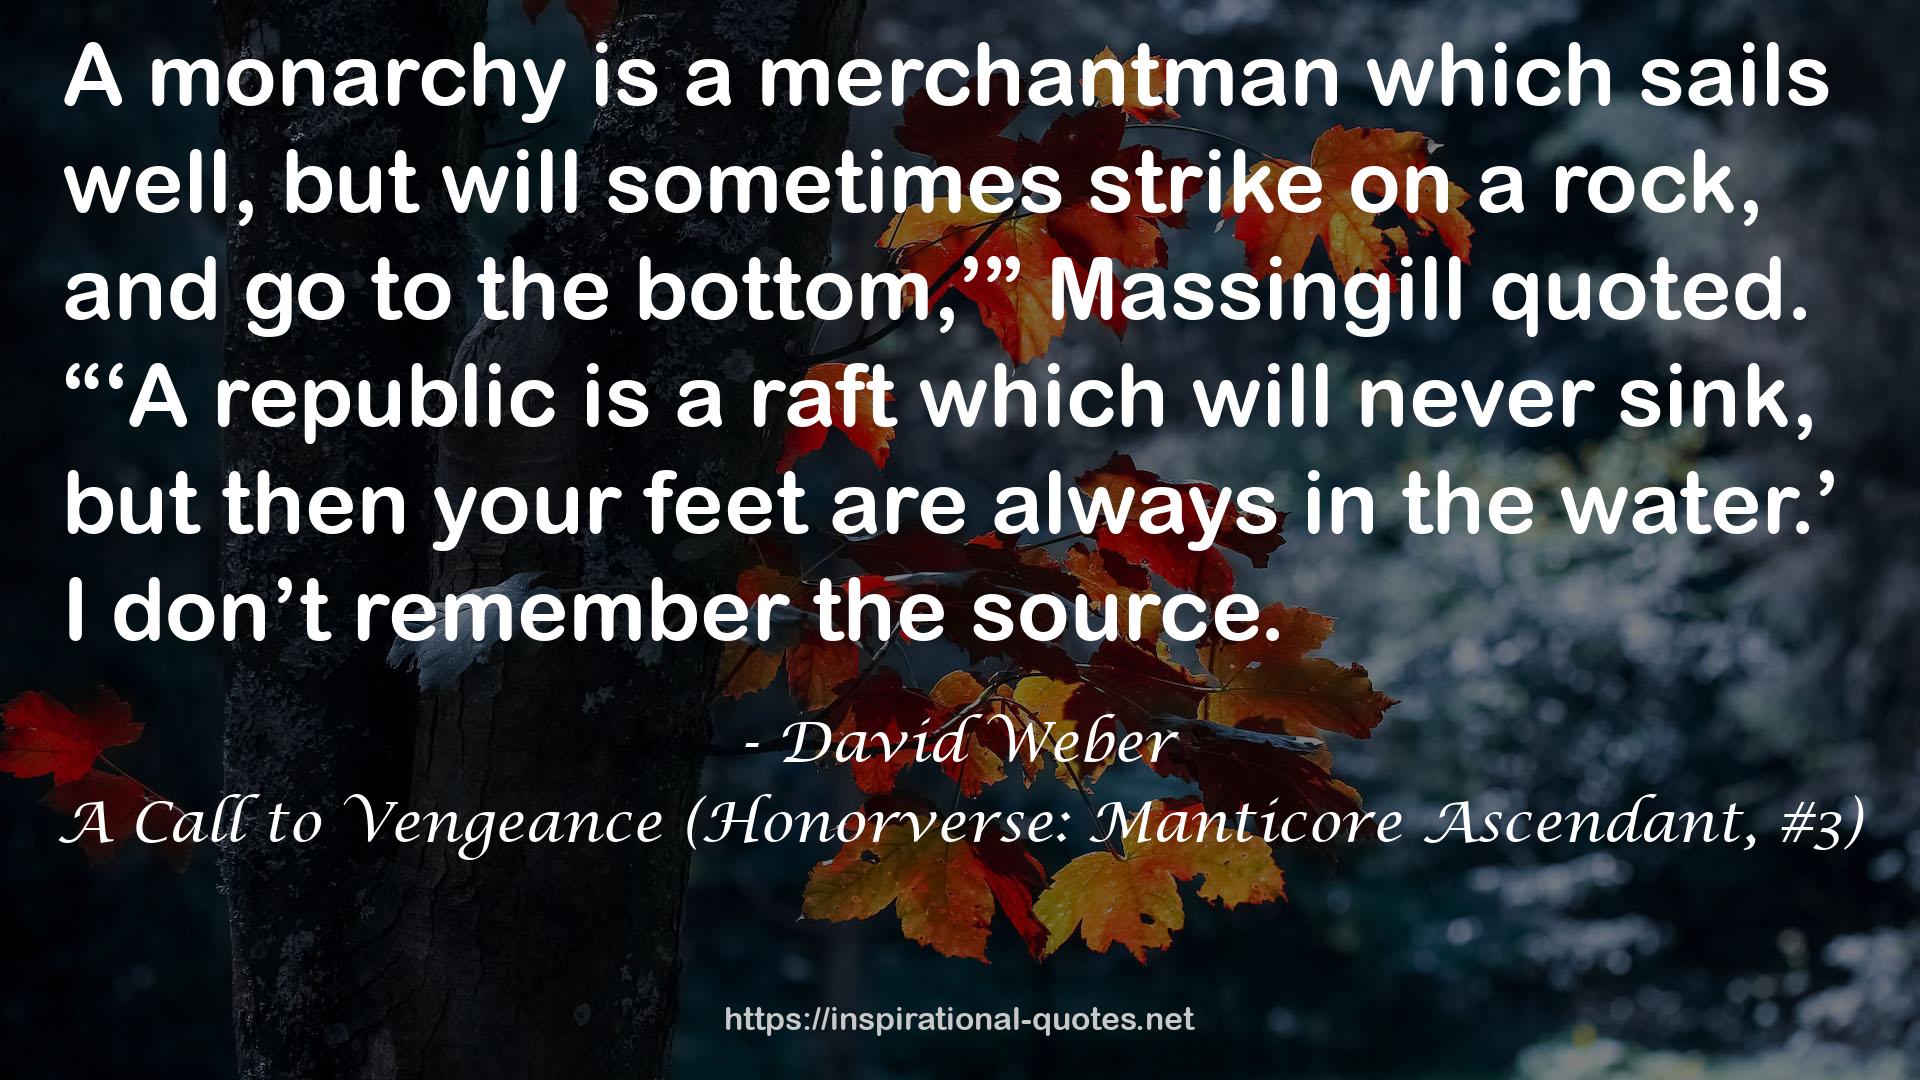 A Call to Vengeance (Honorverse: Manticore Ascendant, #3) QUOTES